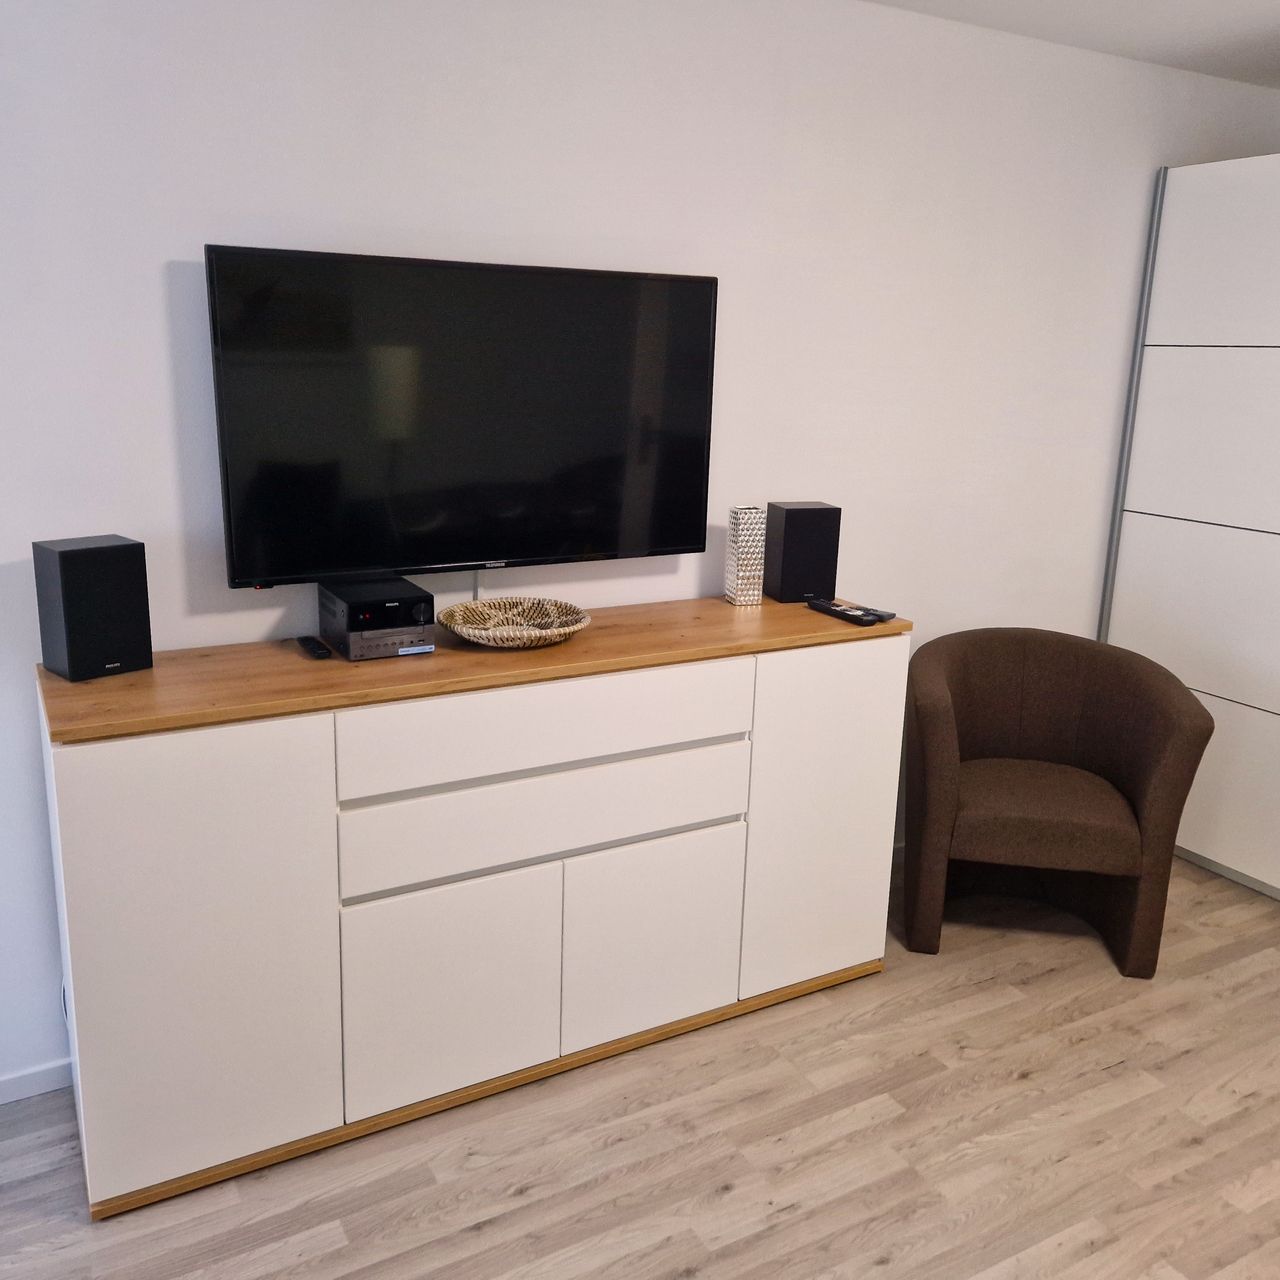 Fully equipped, quiet and just renovated flat (Schwabing/Munich)